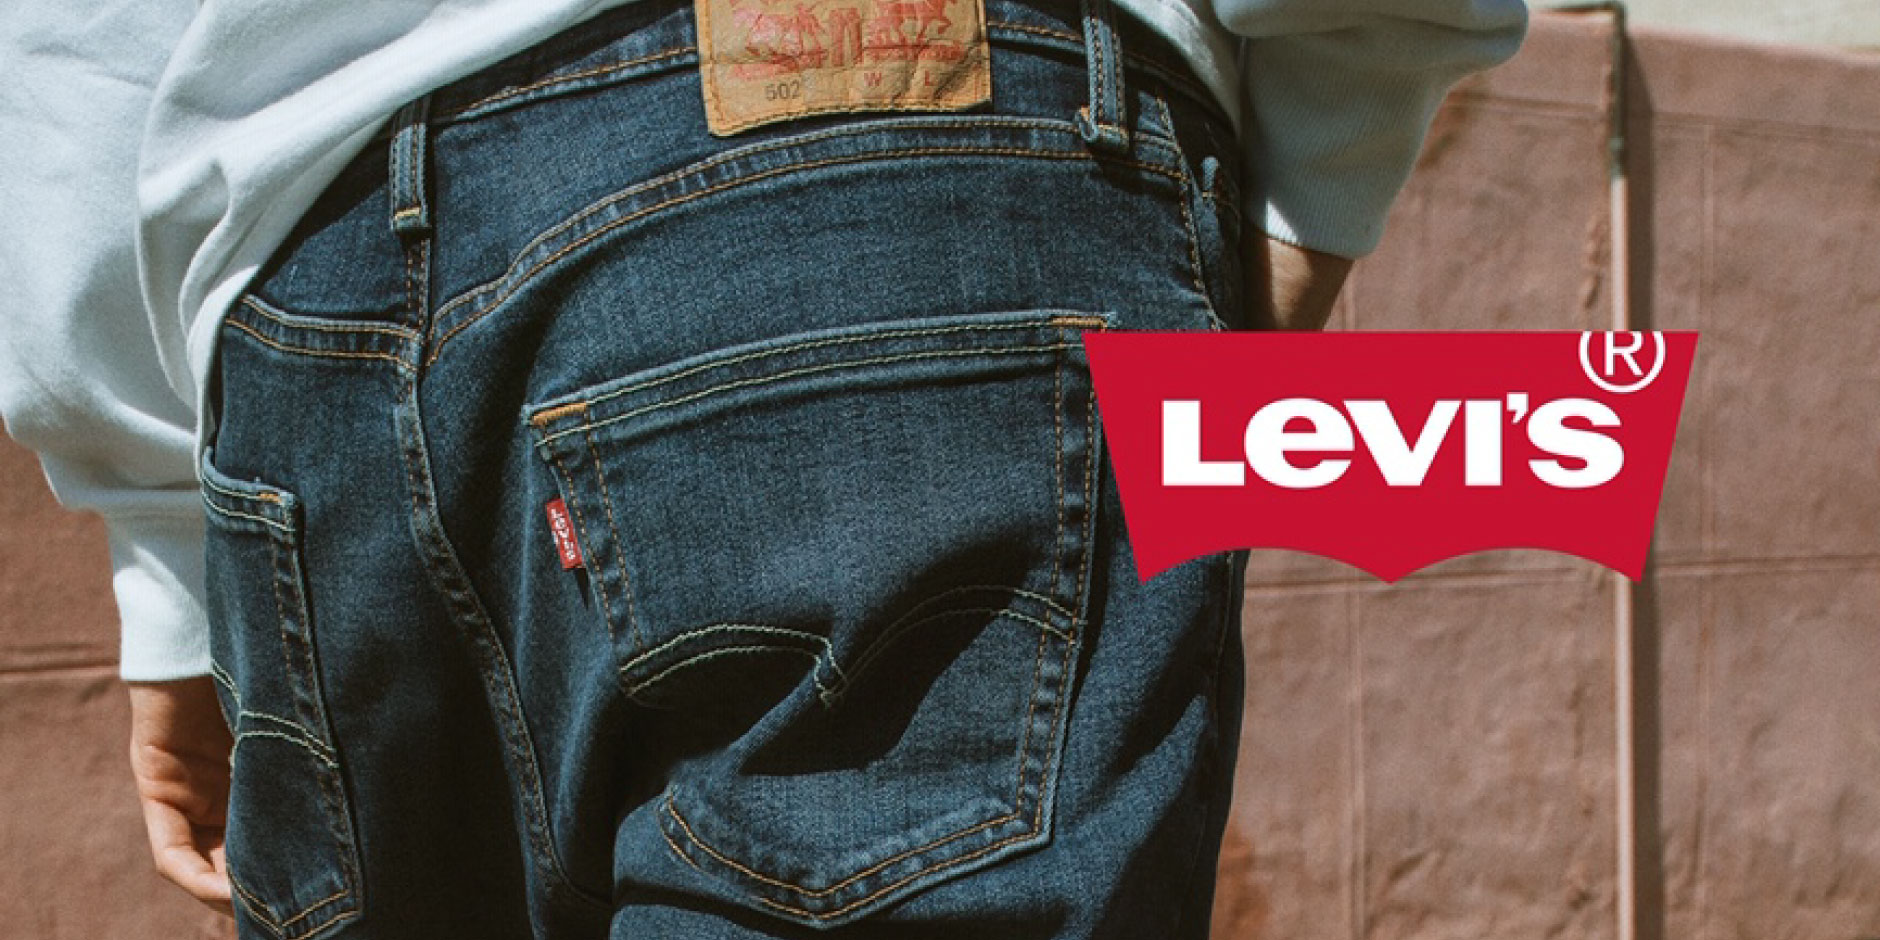 Target's Partnership with Levi Strauss & Co. is Expanding with Red Tab Denim